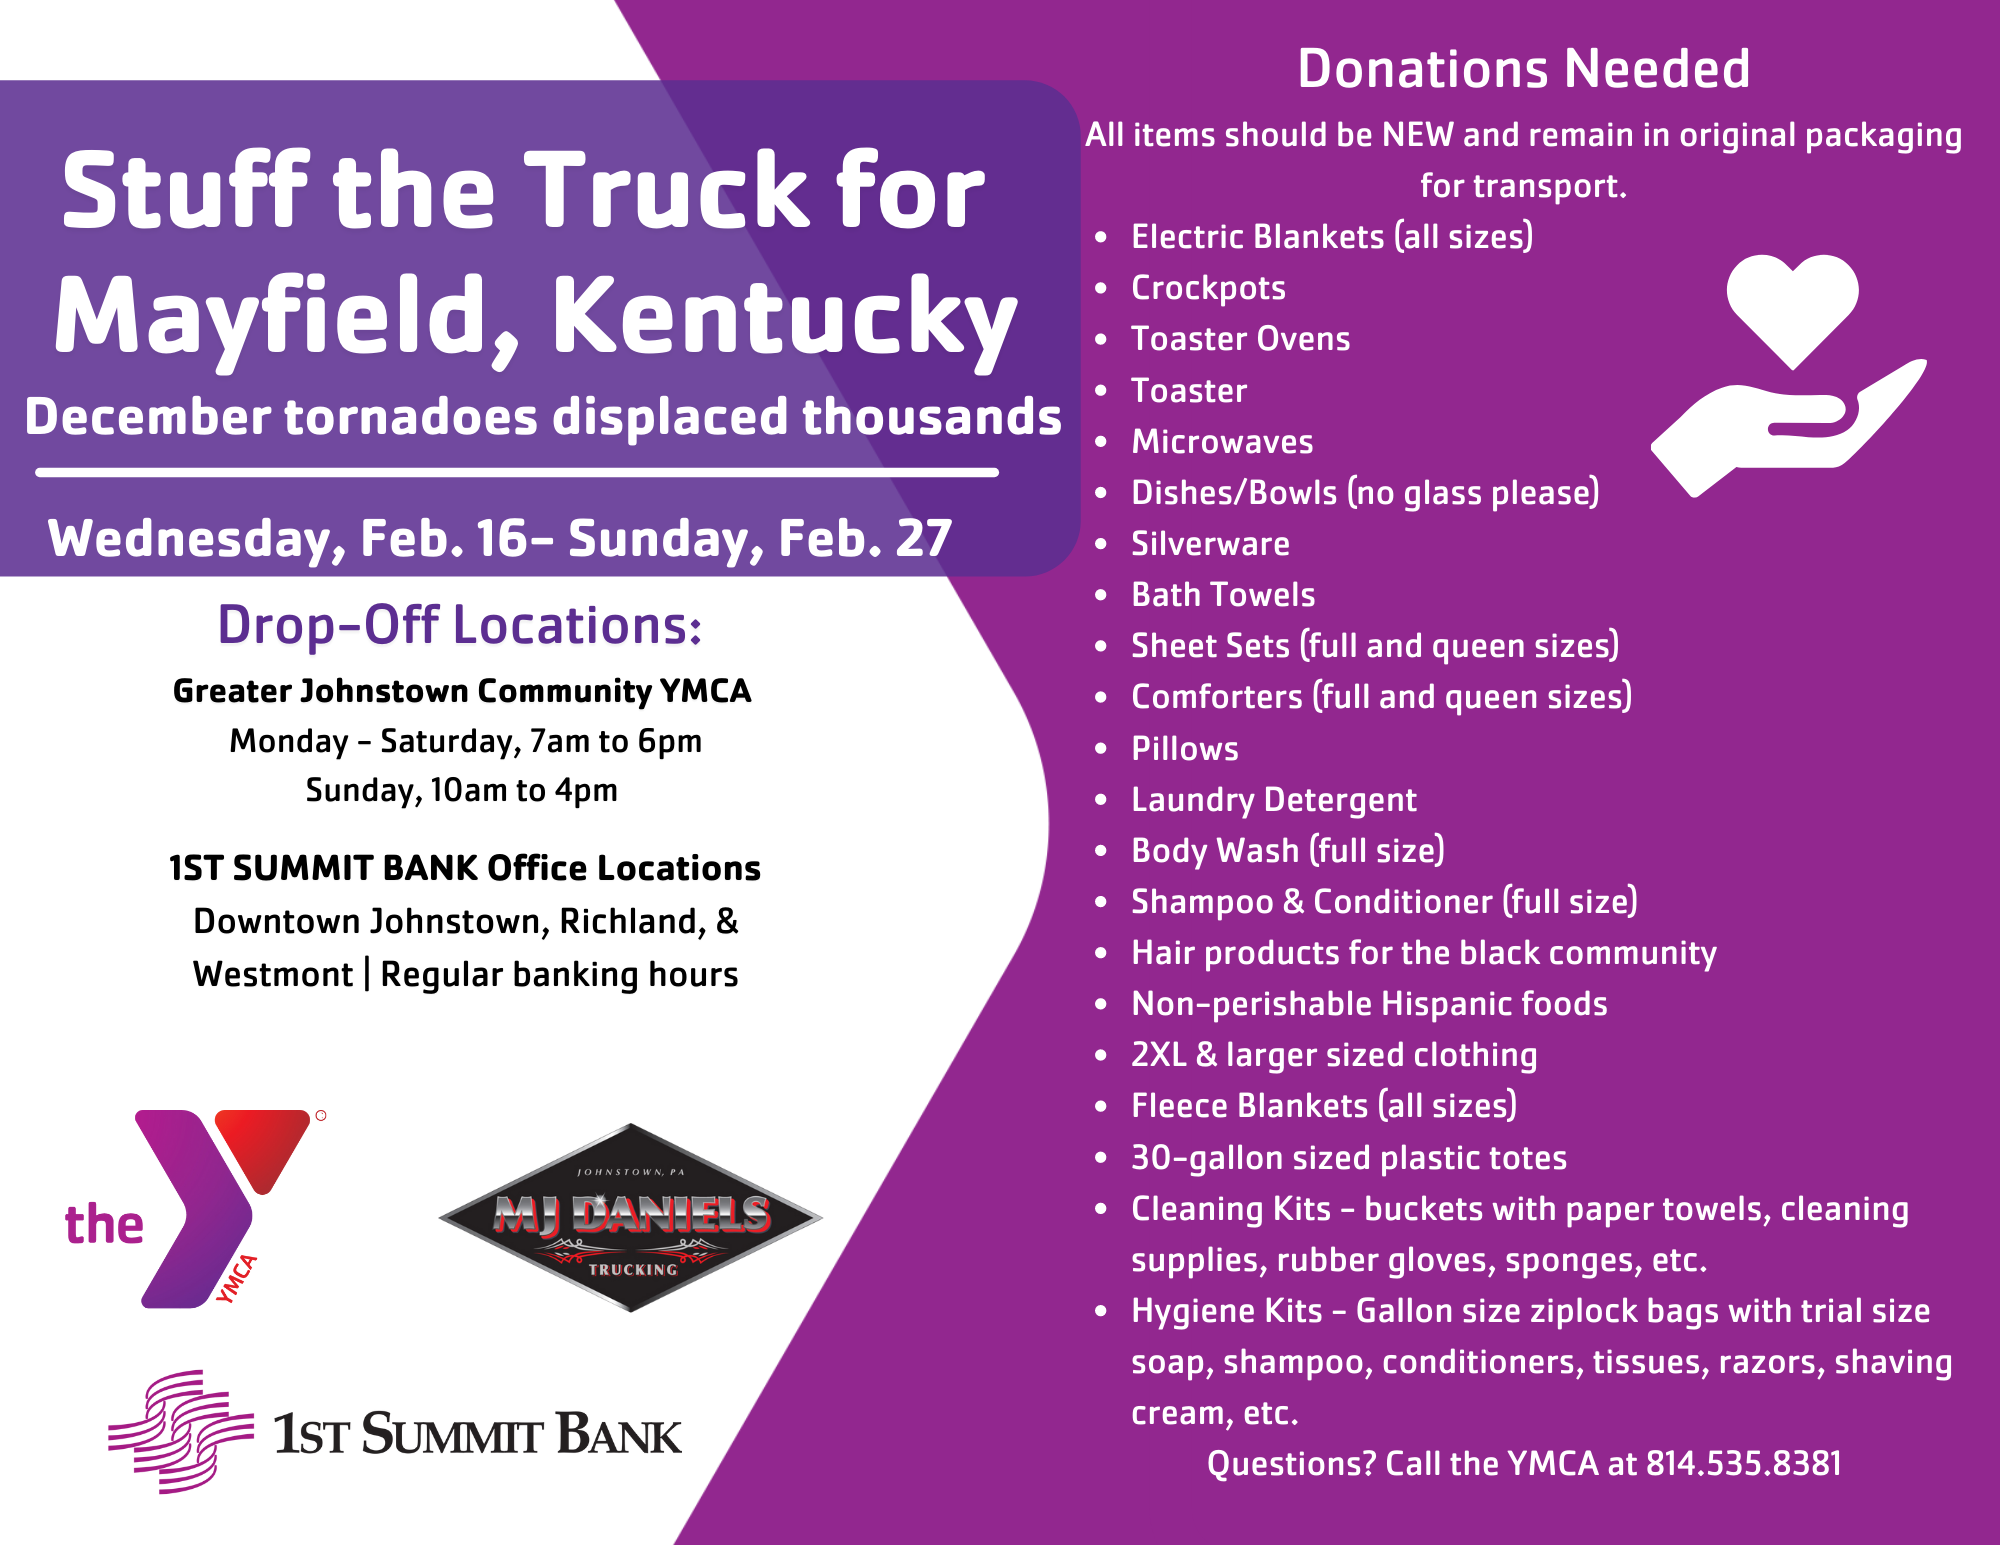 Mayfield, KY to benefit from 1ST SUMMIT donation drive